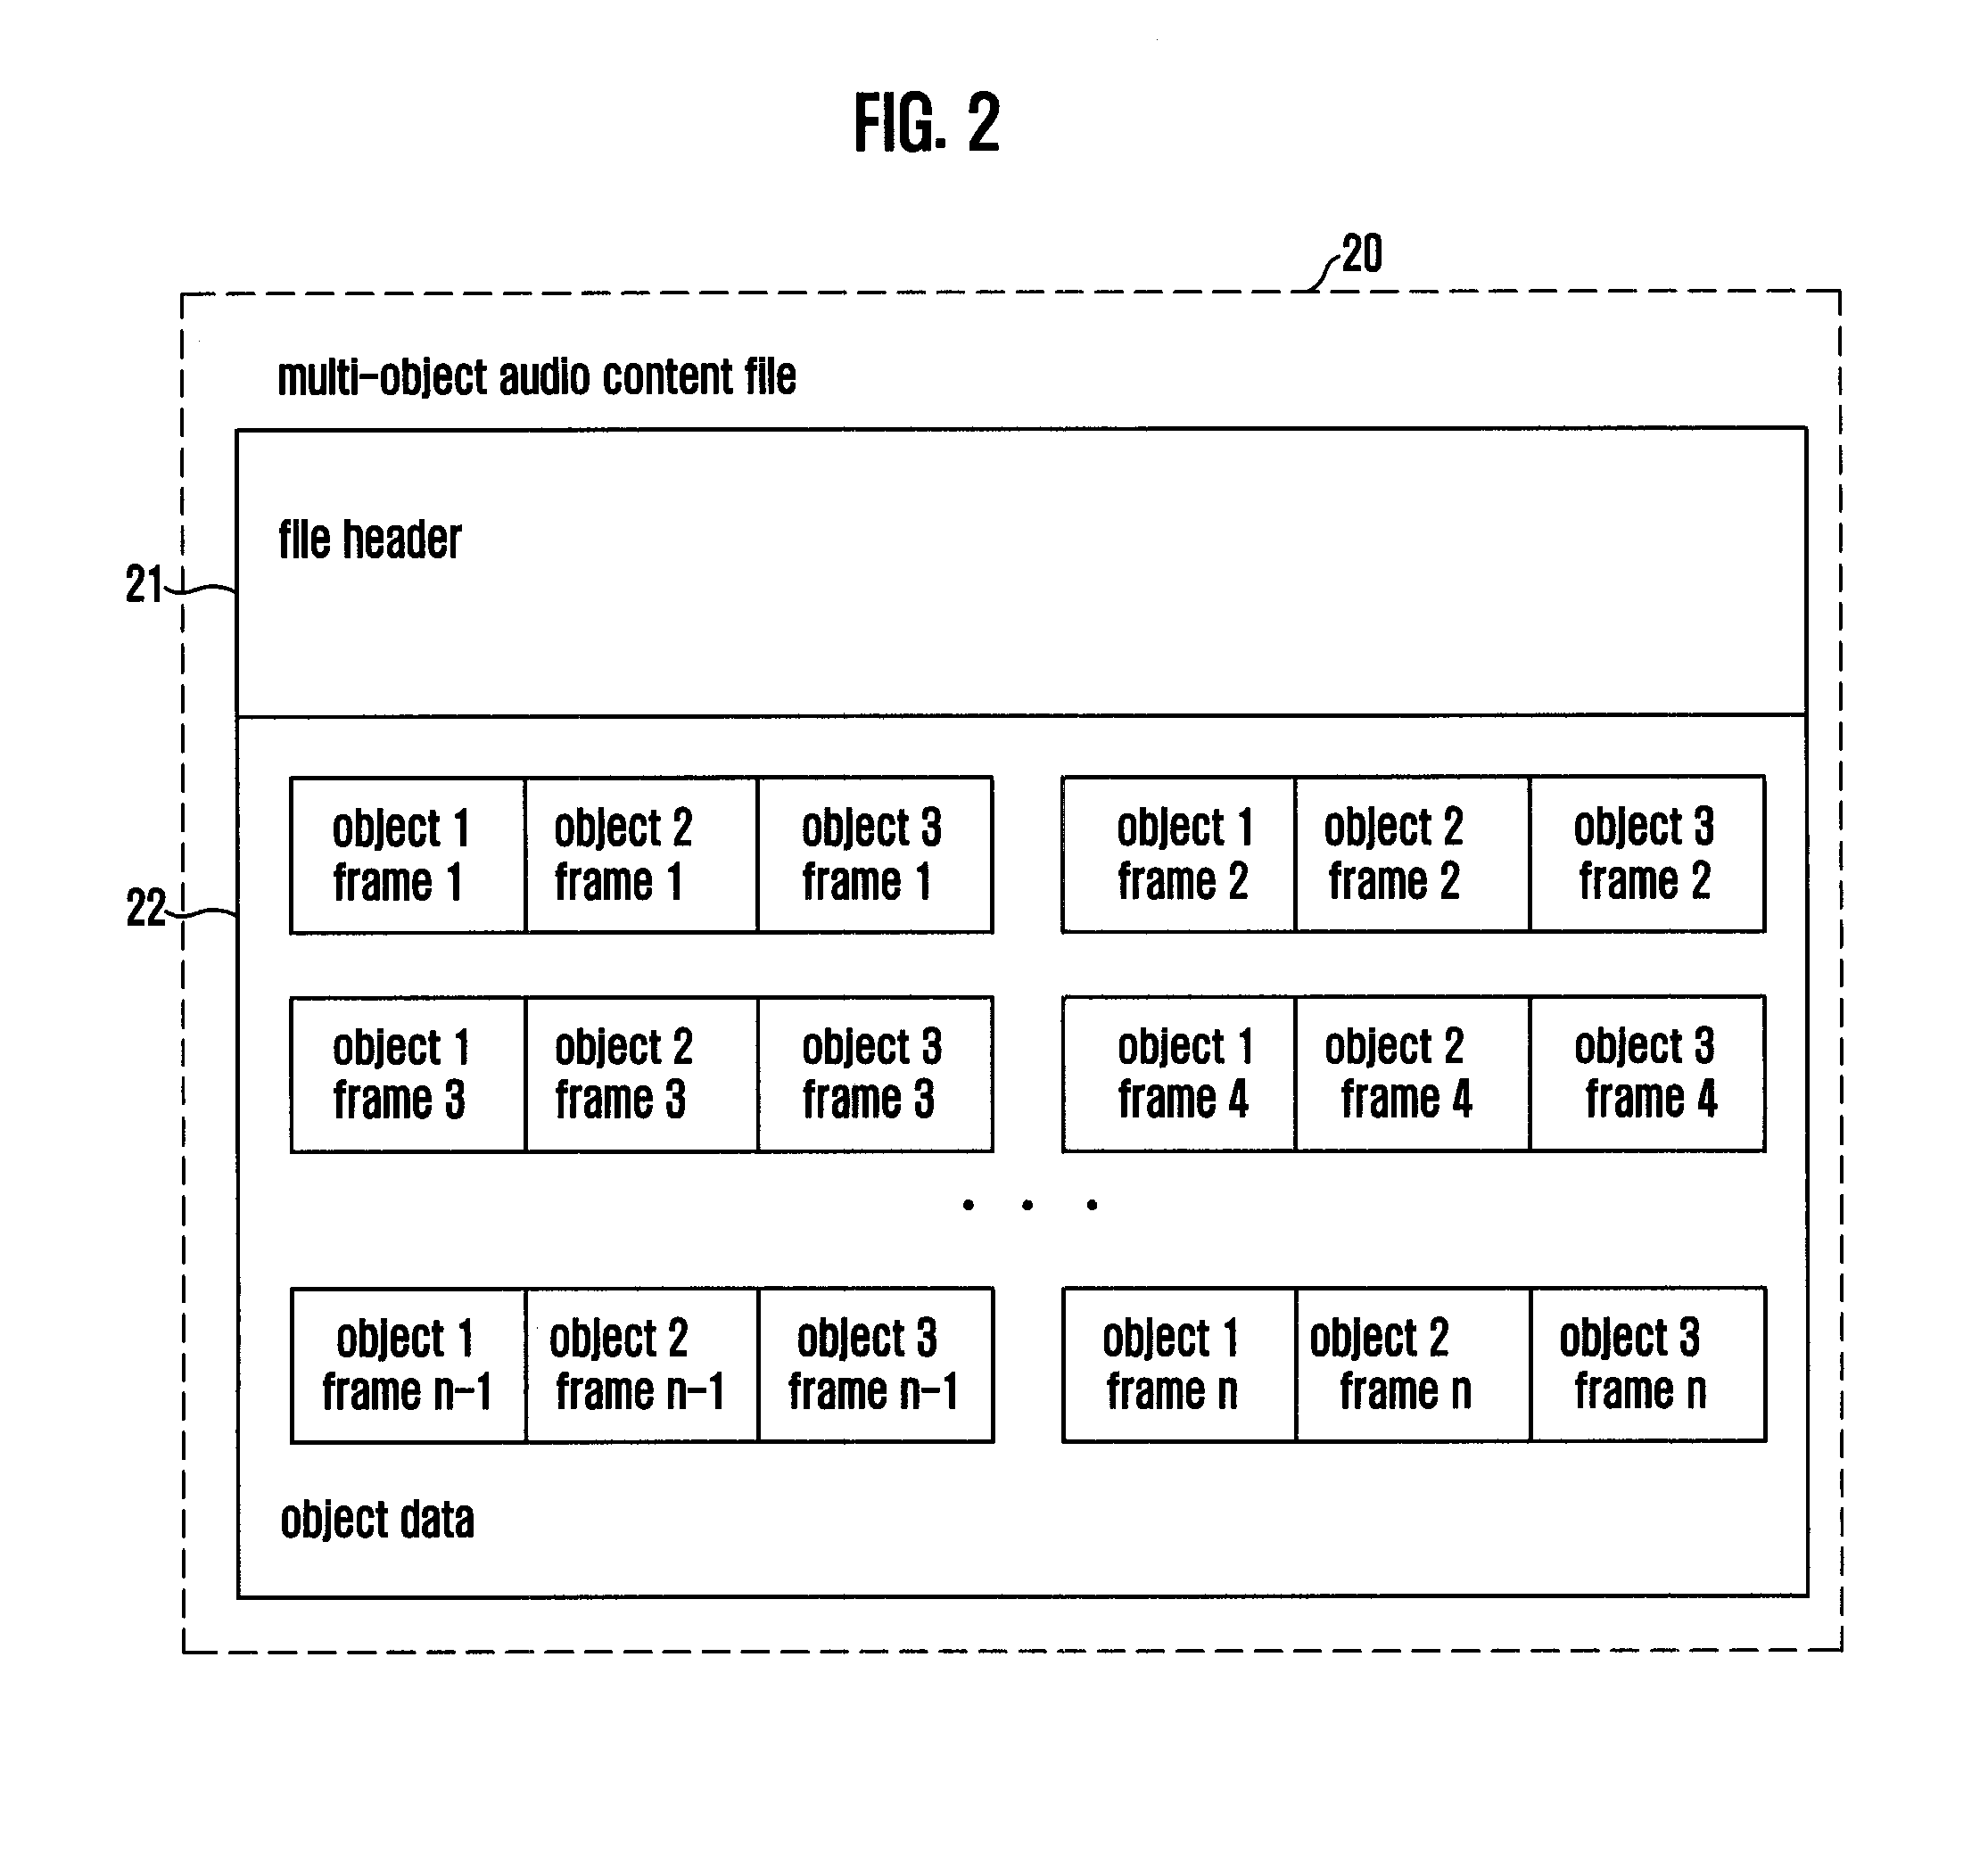 Method for creating, editing, and reproducing multi-object audio contents files for object-based audio service, and method for creating audio presets